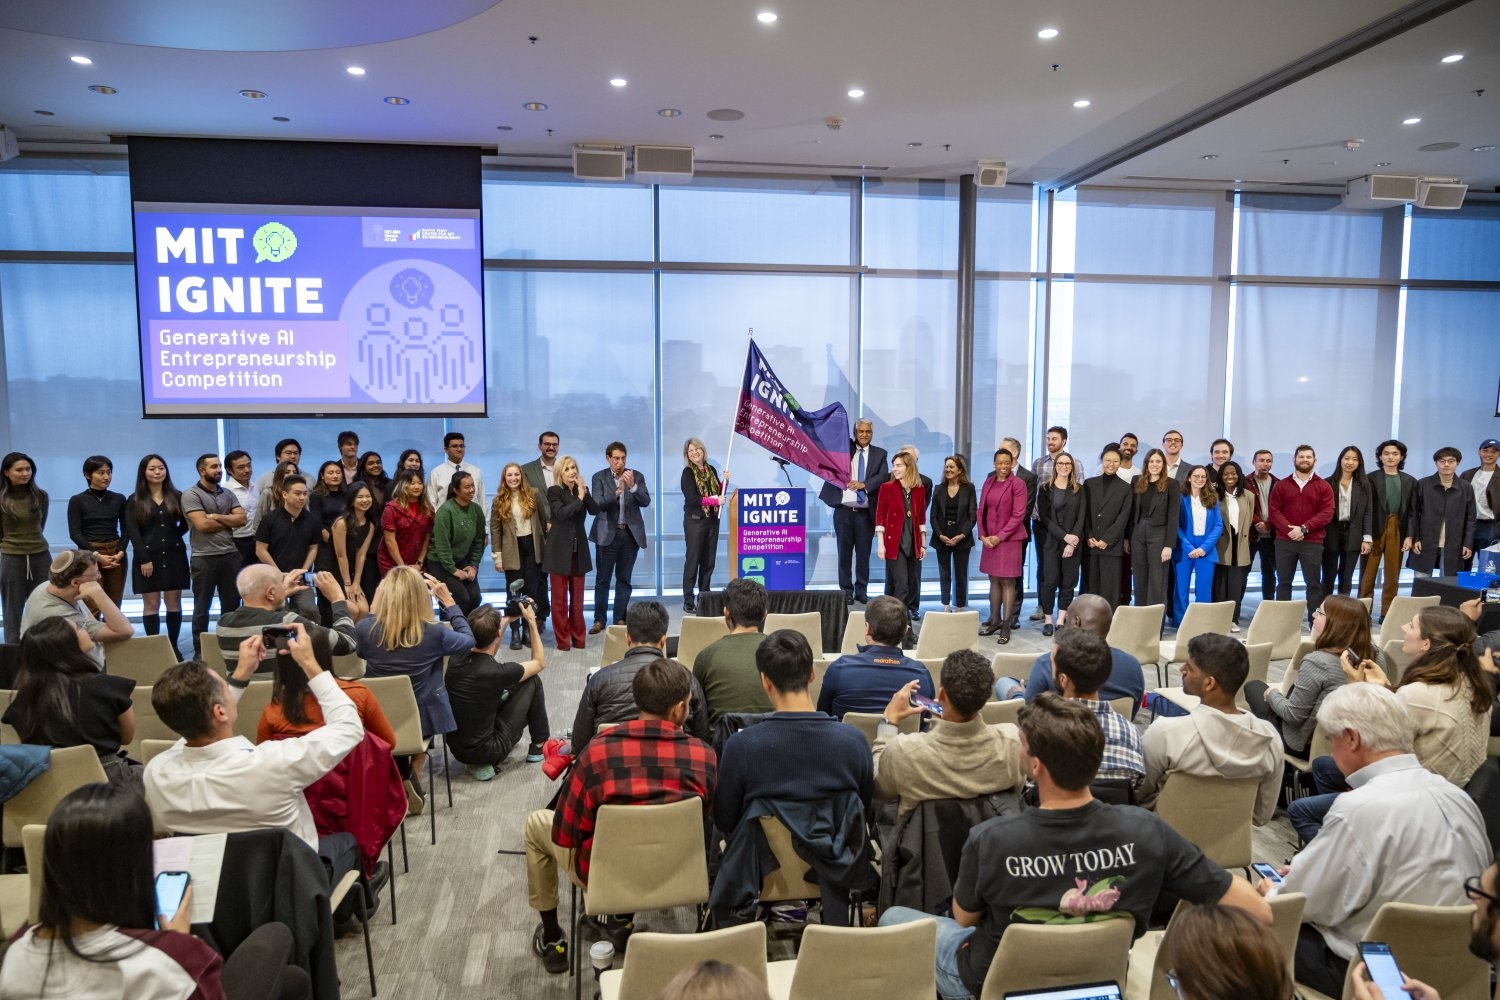 MIT President Sally Kornbluth (left of lectern) and School of Engineering Dean Anantha Chandrakasan (right of lectern) wave the MIT Ignite: Generative AI Entrepreneurship Competition flag alongside other members of Institute leadership and the 12 finalist teams.